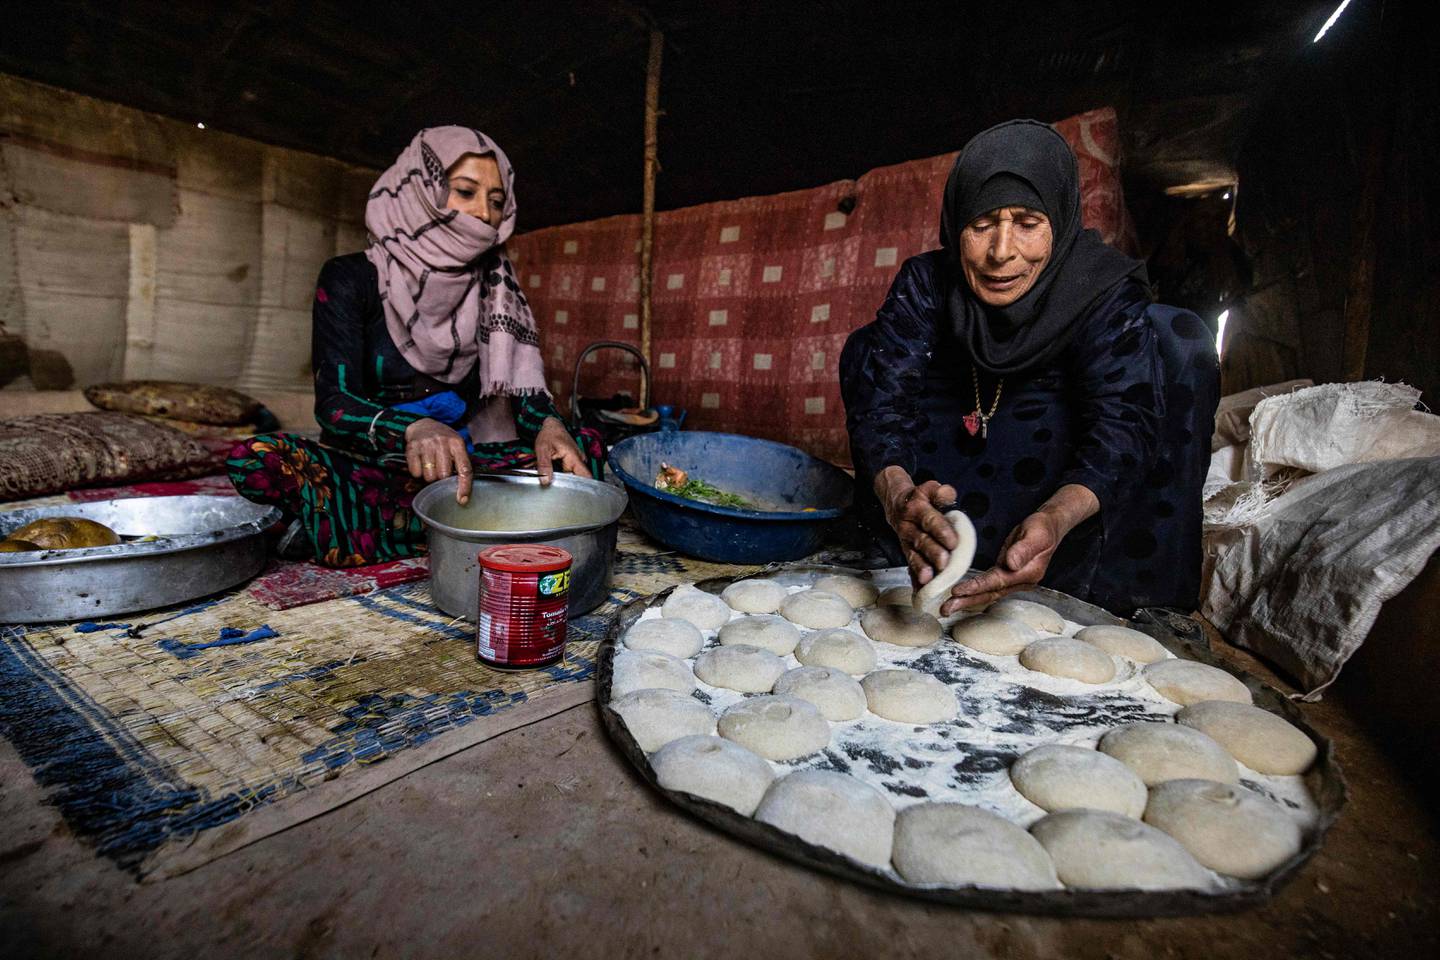 Two Syrian women prepare Ramadan food at the Kabsh camp for displaced people in the countryside near Syria's northern city of Raqqa. AFP